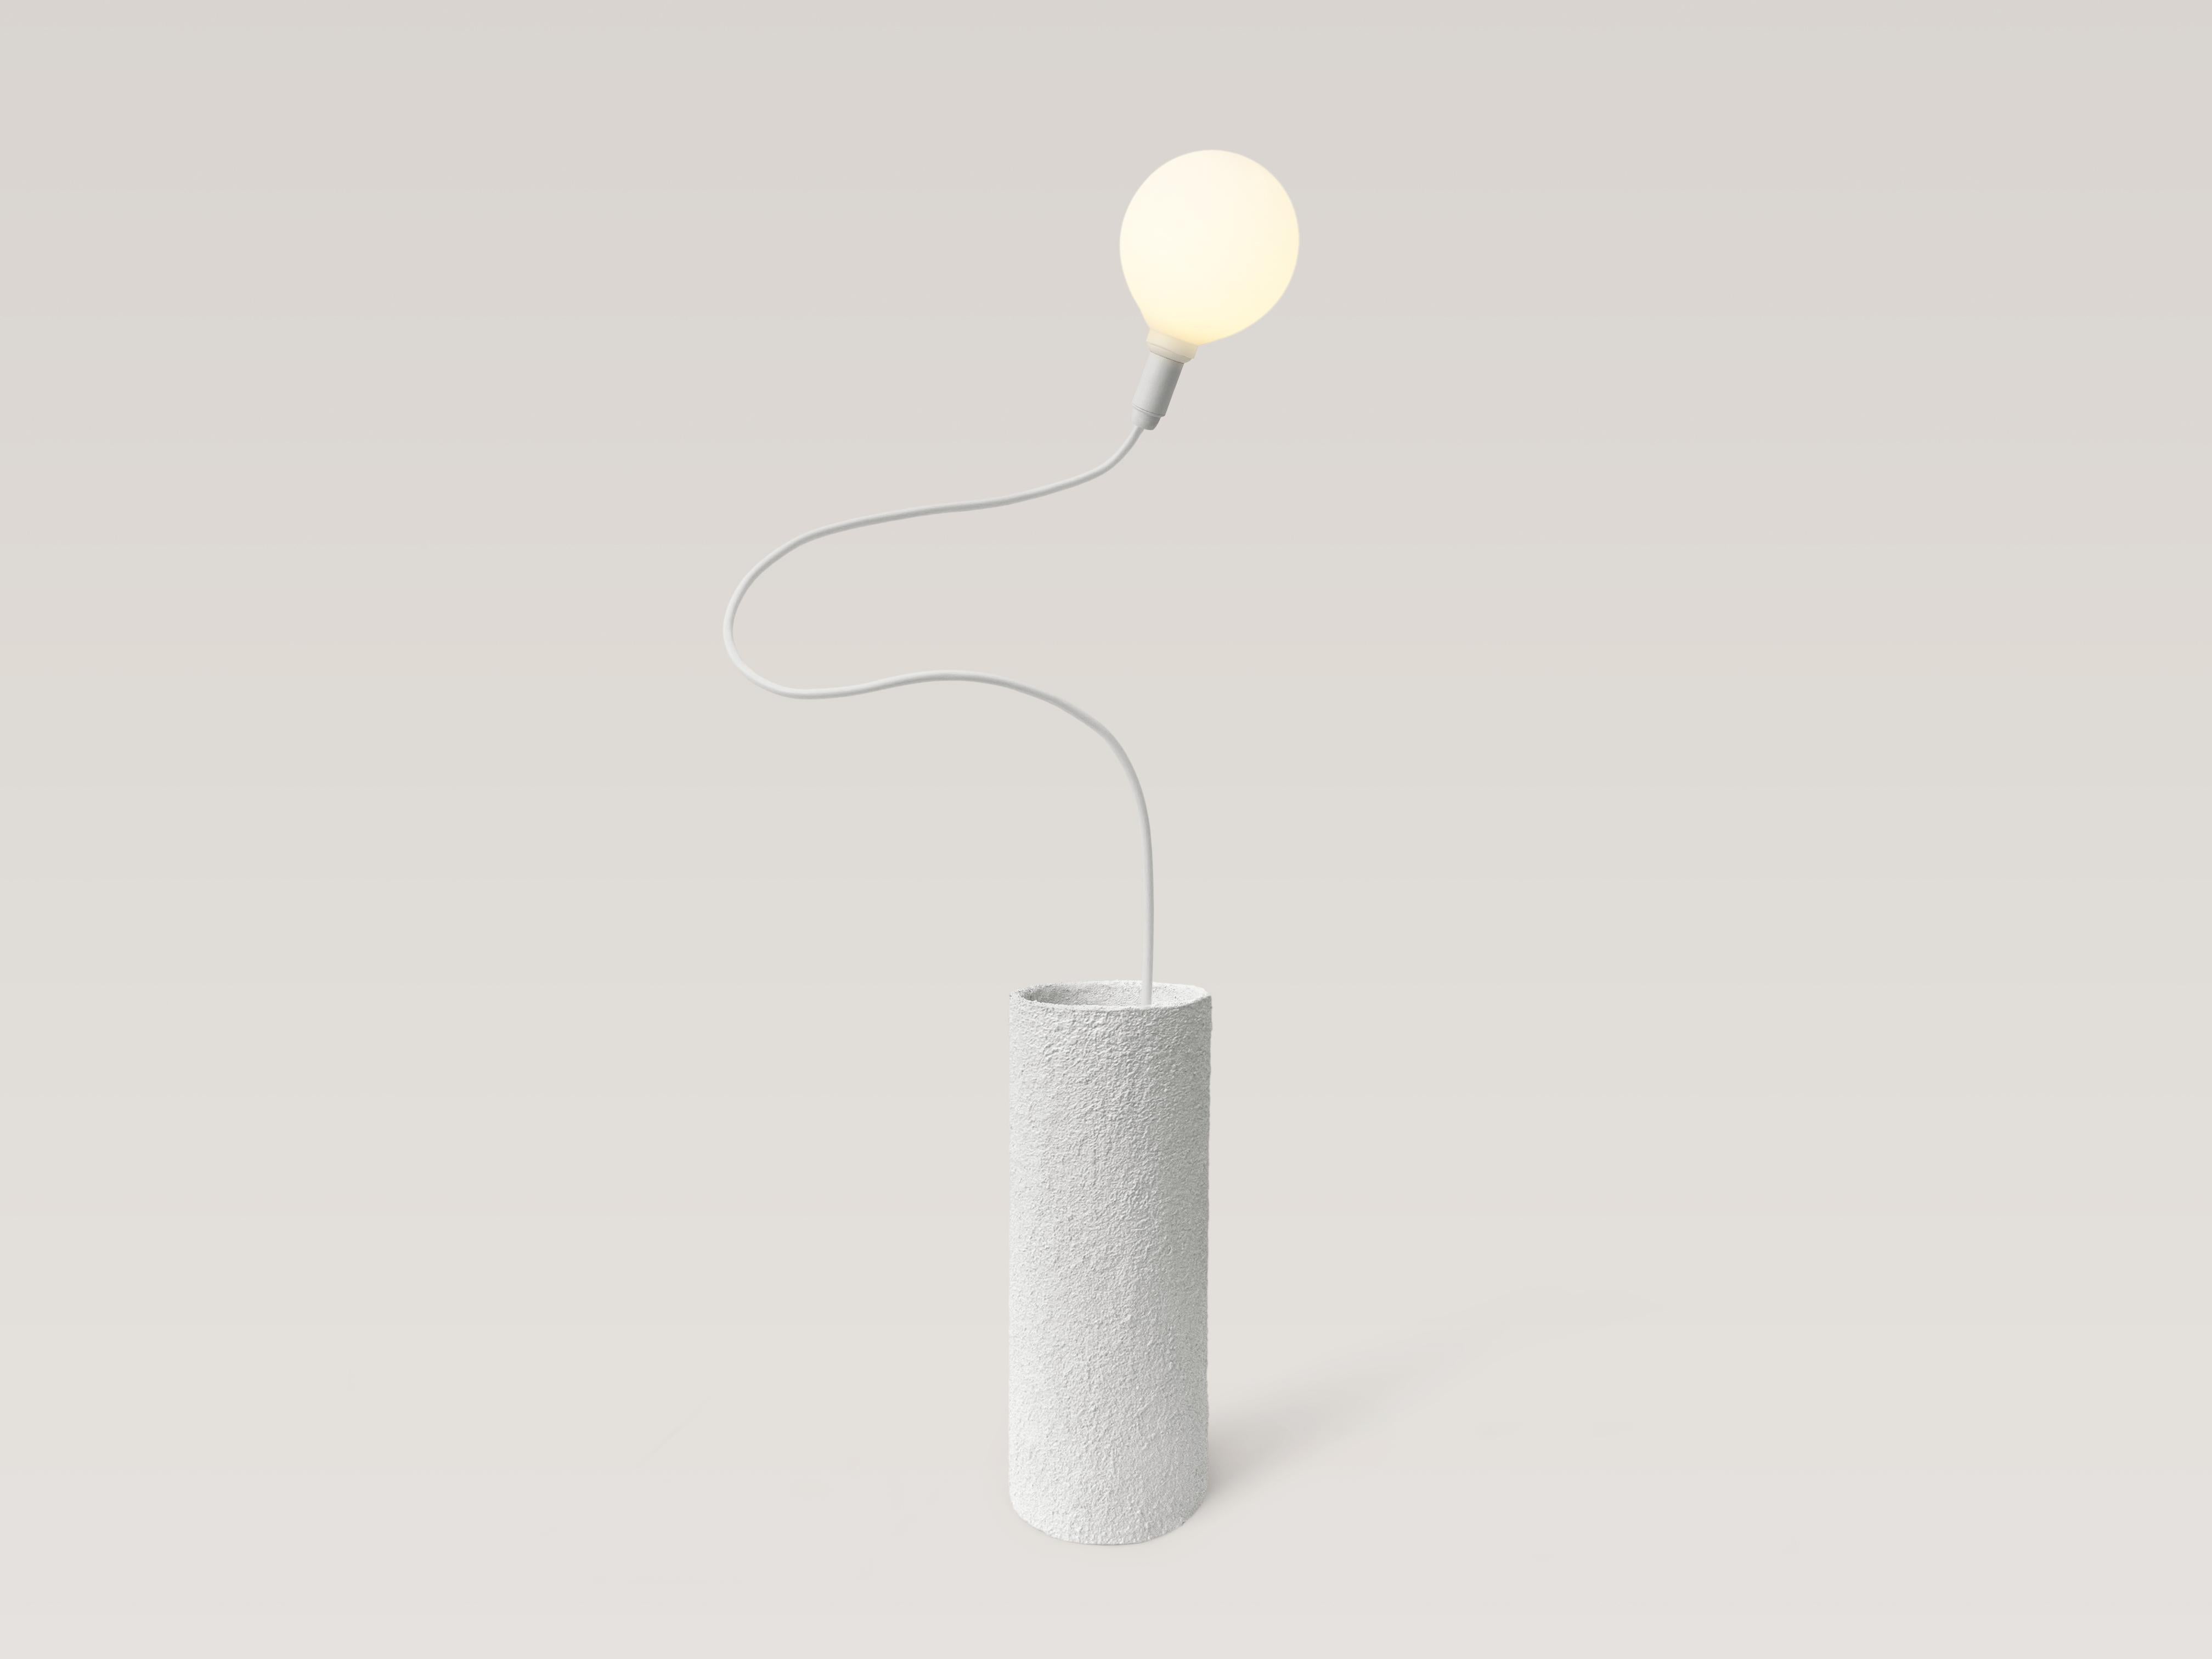 Playful Dimmable lamp. Unique piece.

Material: reclaimed plastic and wood, copper, foam, PVA, sand, acrylic paint, spray paint, polyurethane, glass globe, electrical components, dimmable LED bulb.